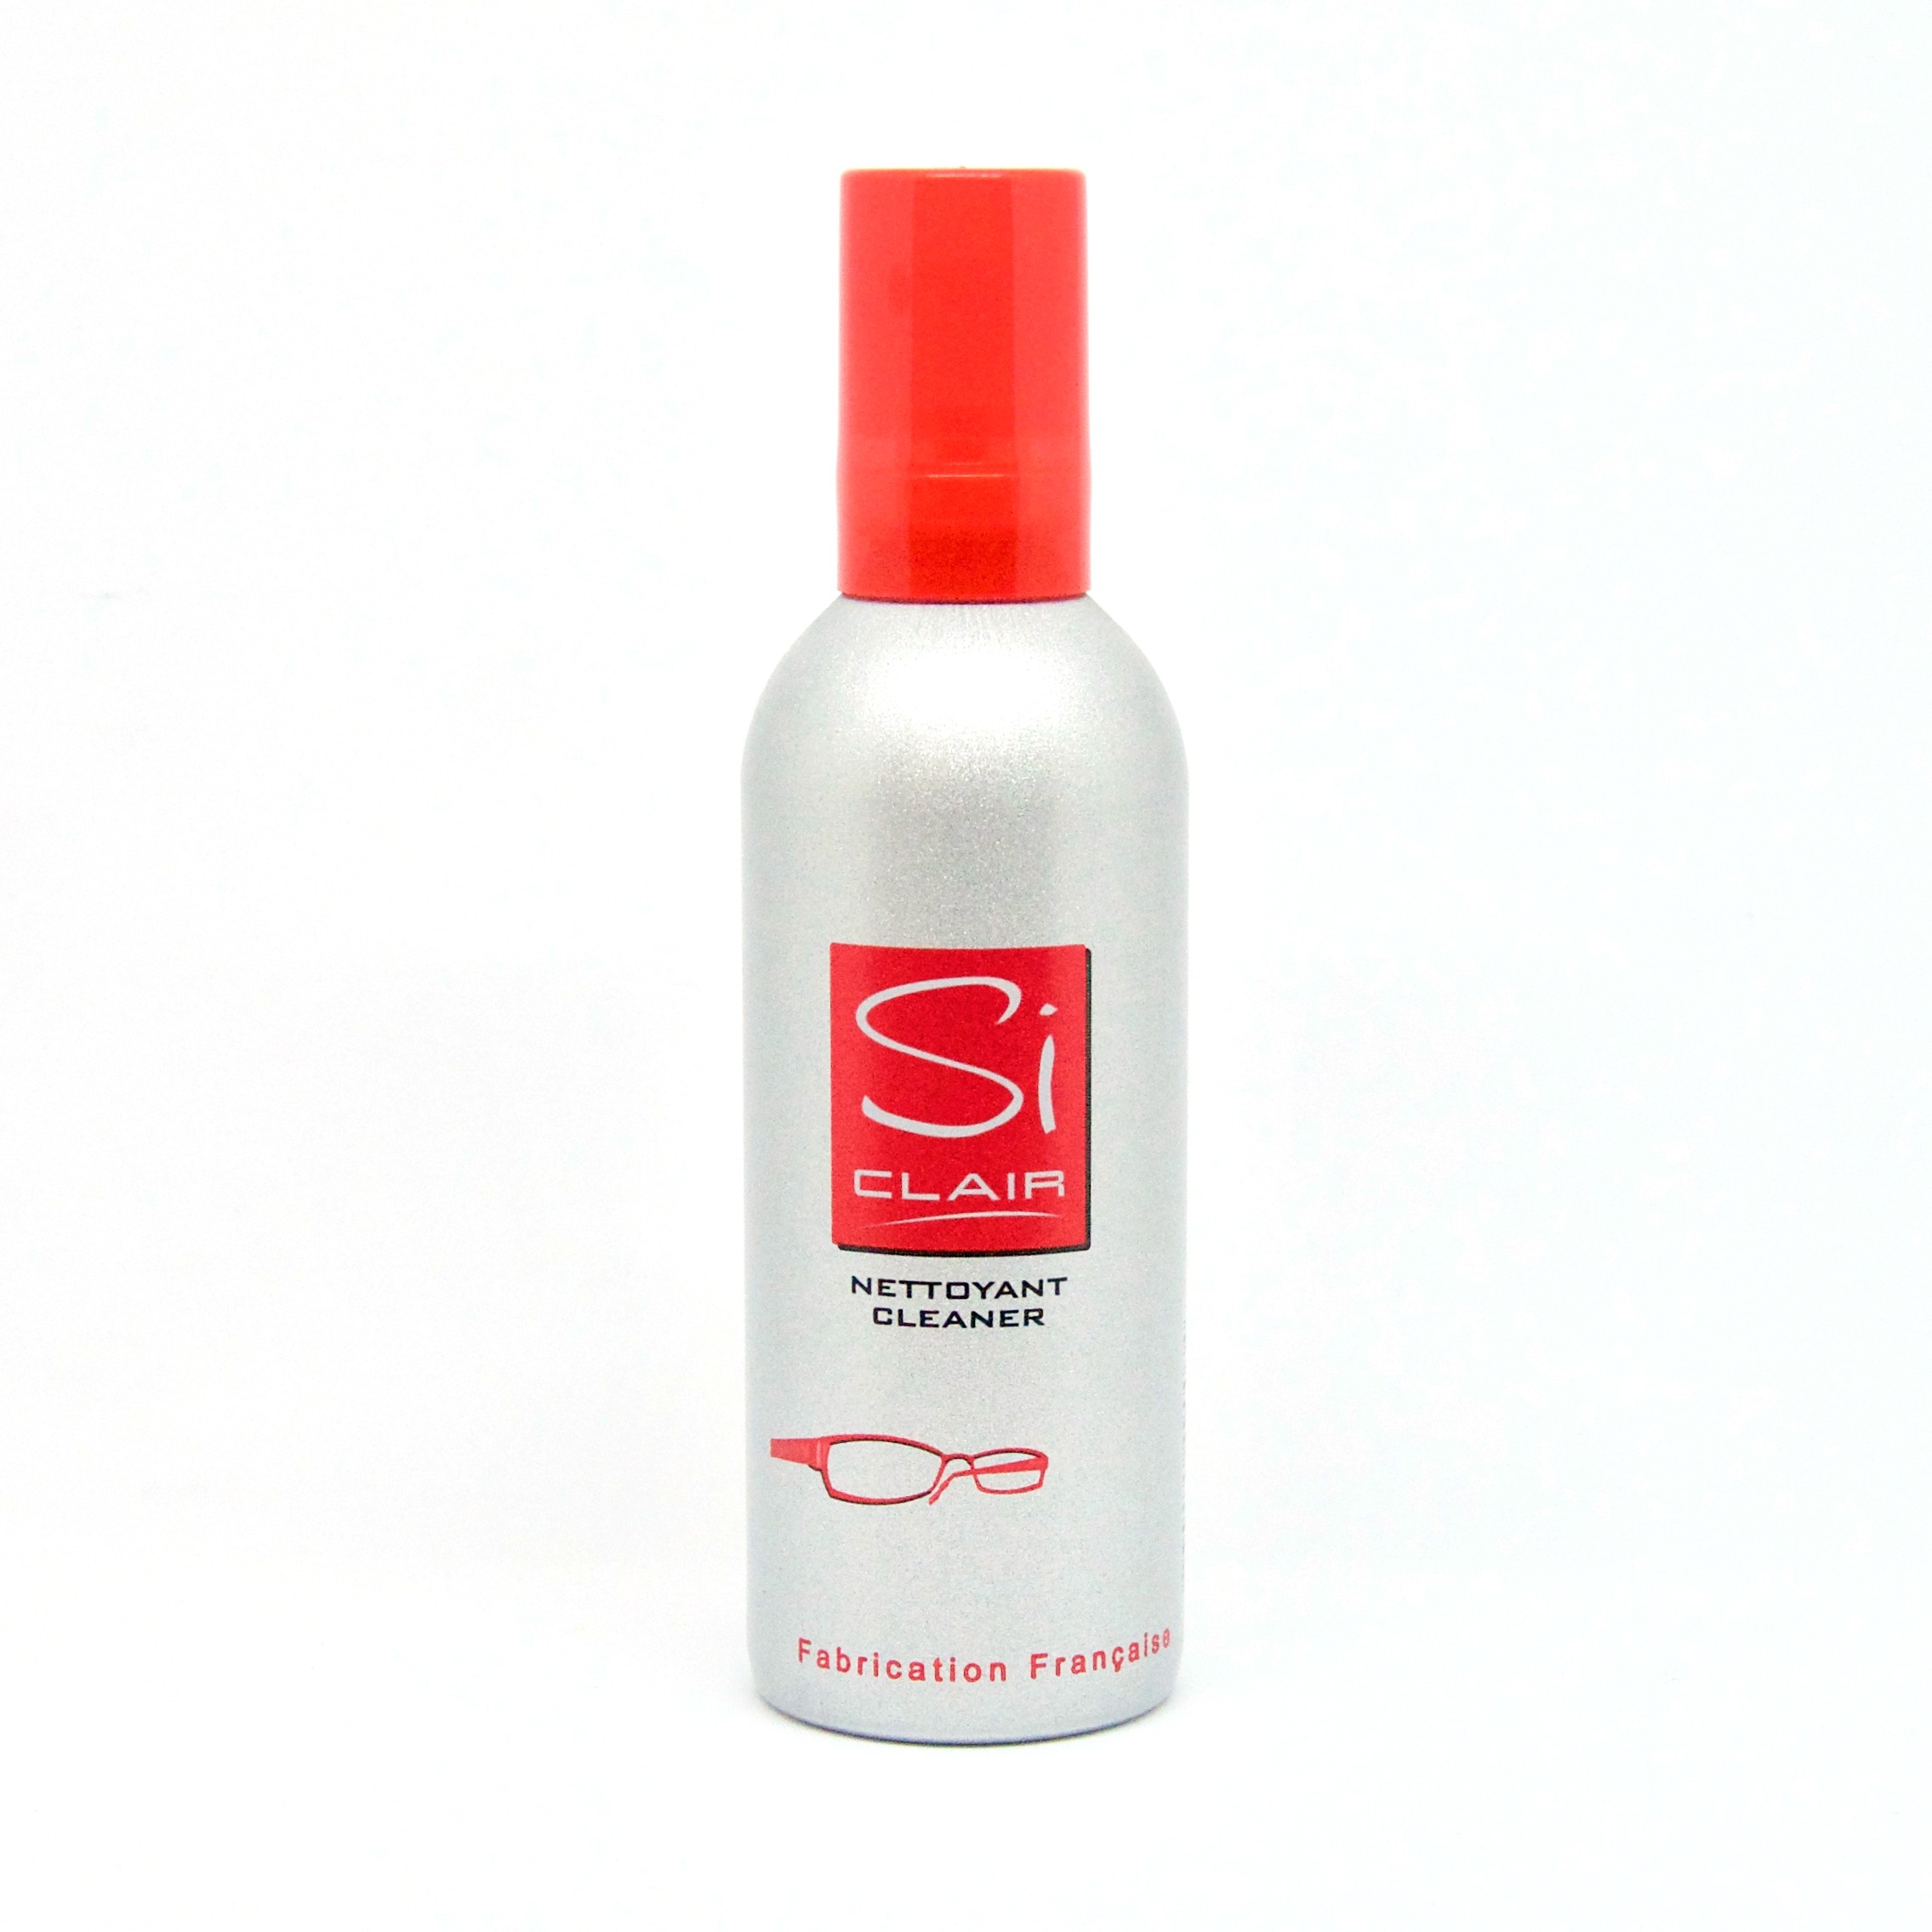 Spray nettoyant rechargeable Siclair 35ml - Michils Opticiens